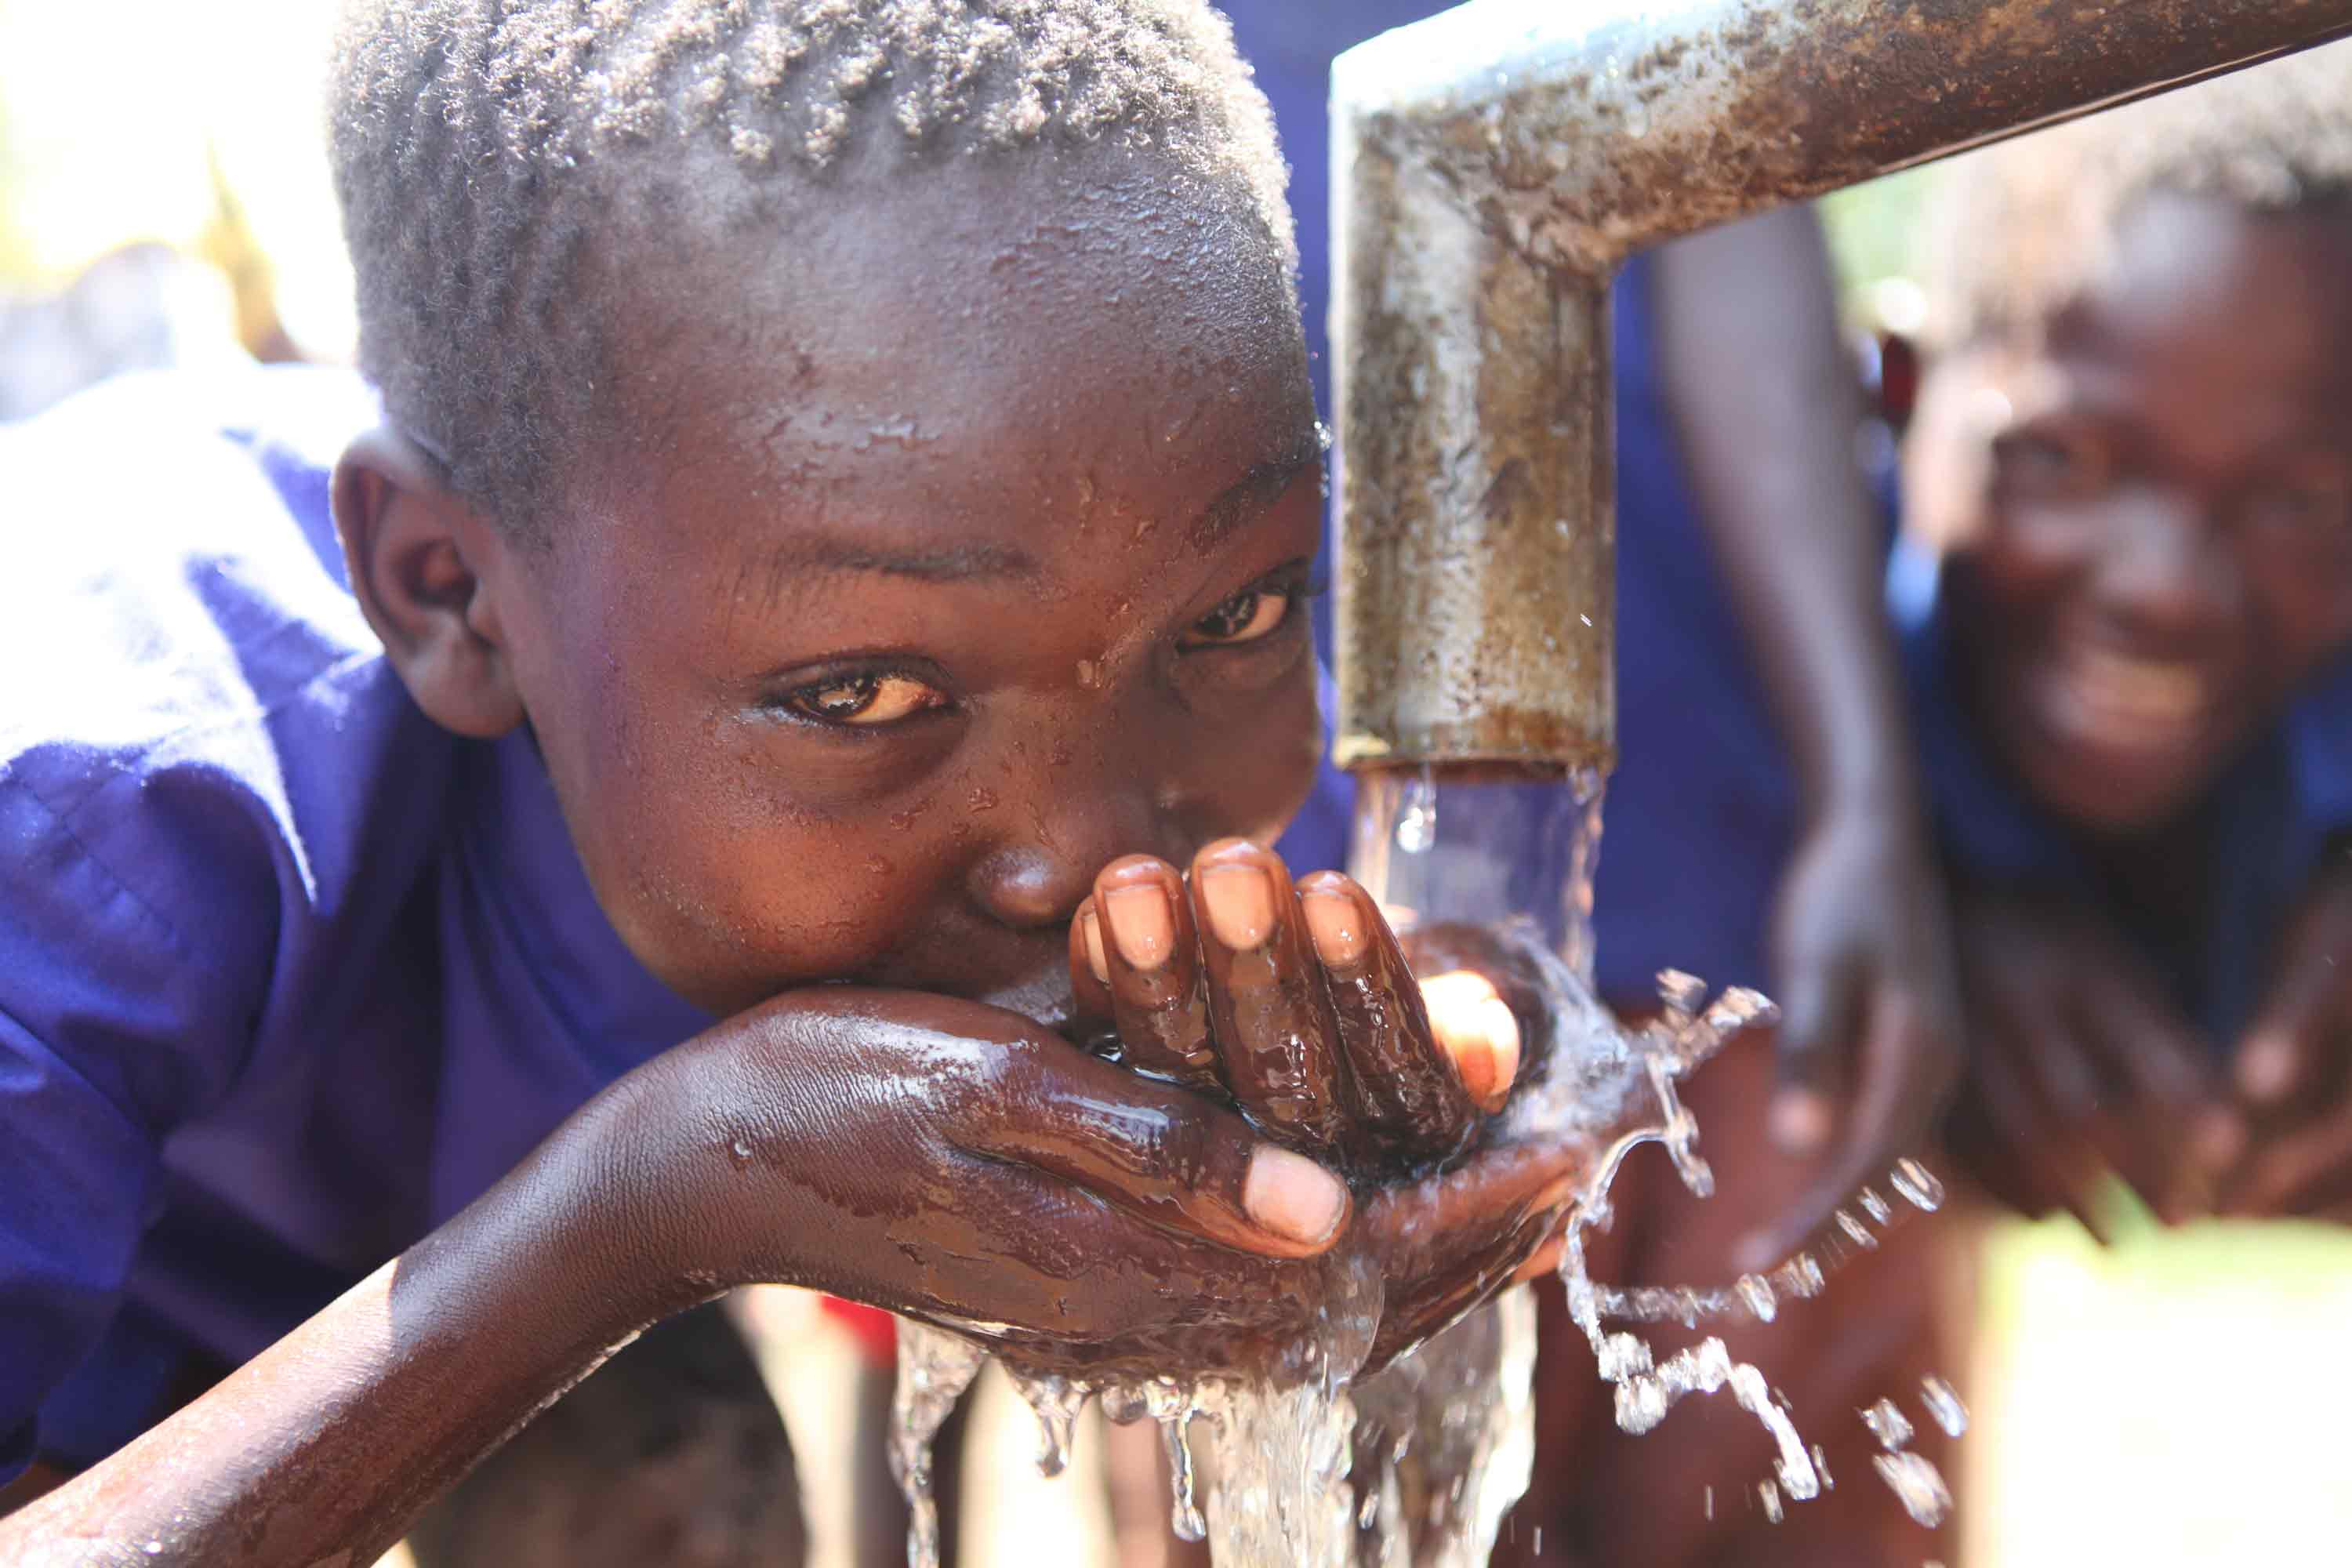 A boy in South Sudan drinks clean water from a well.